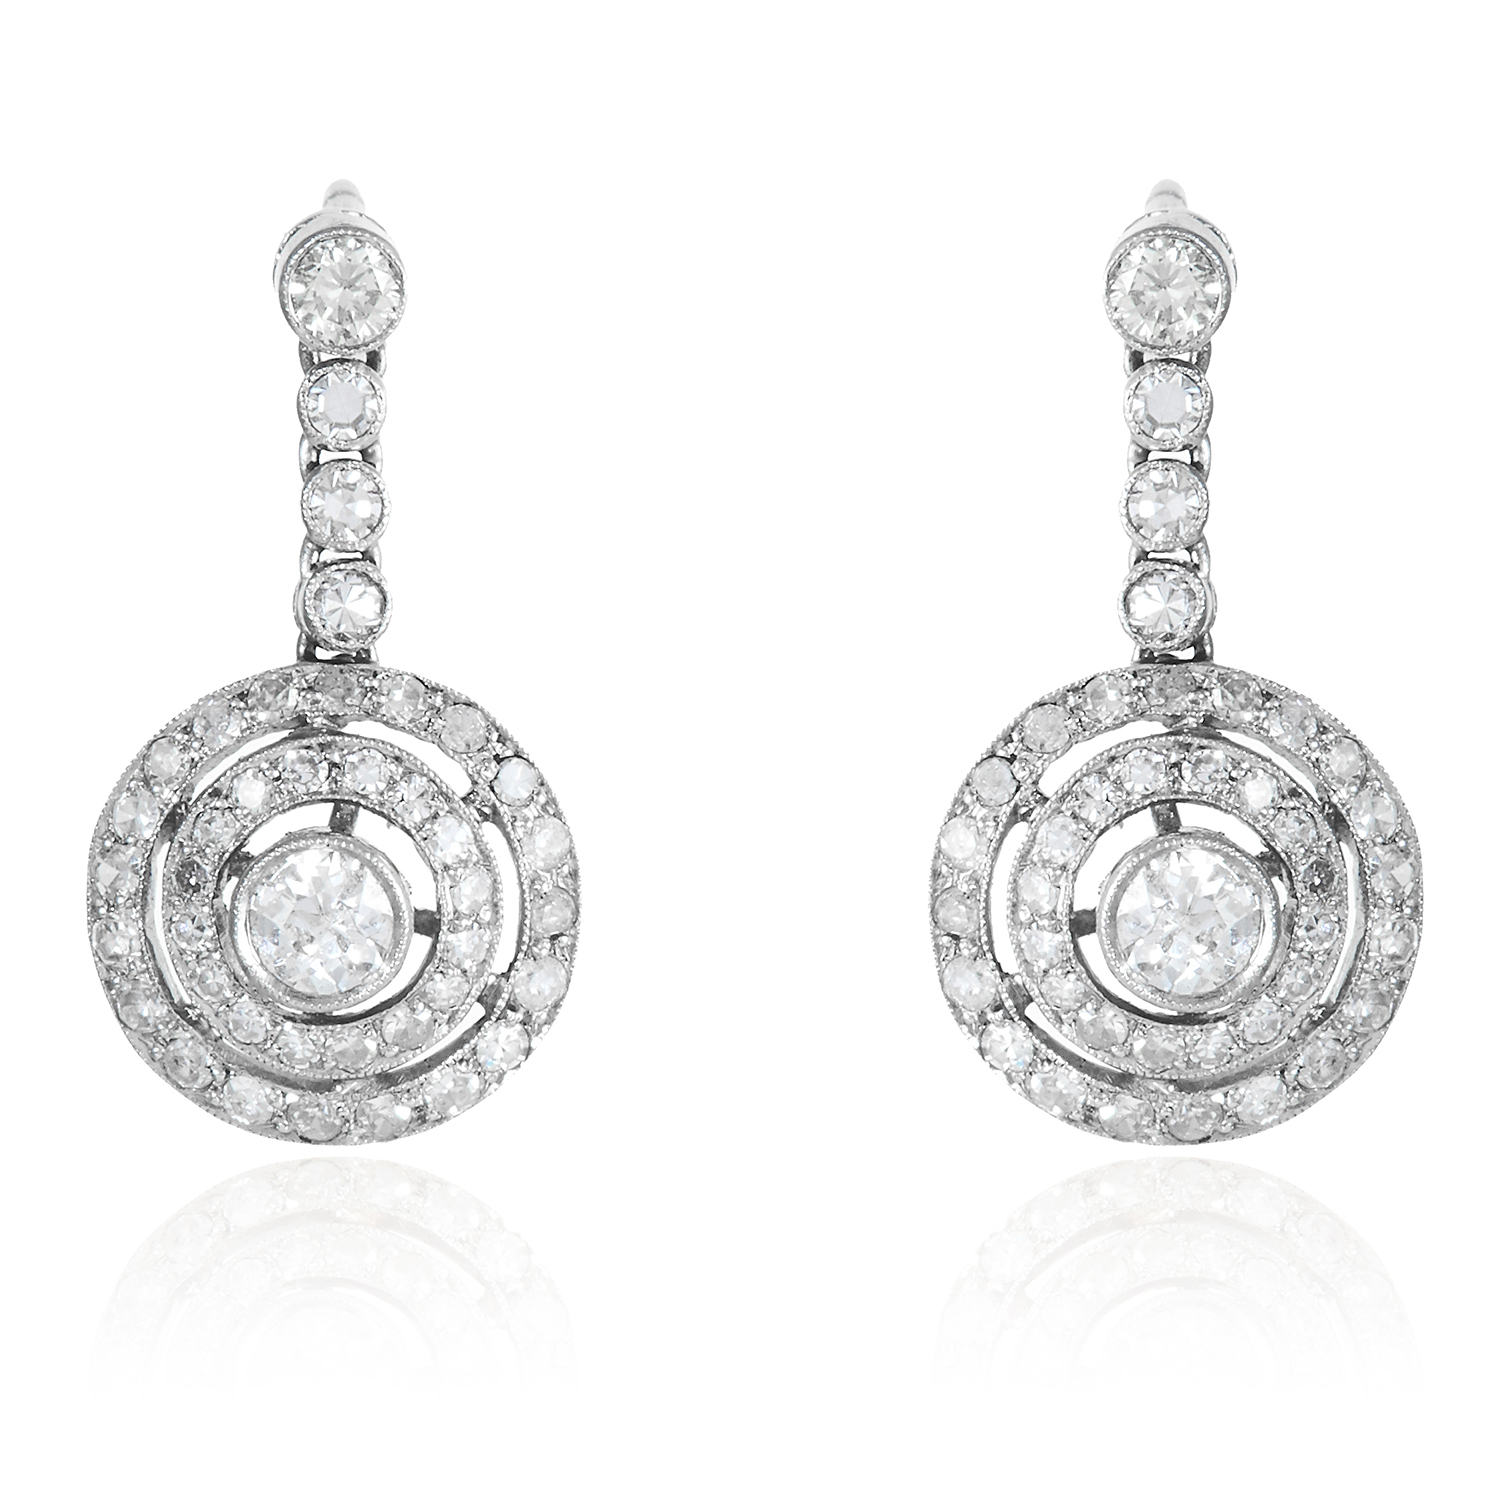 A PAIR OF DIAMOND EARRINGS in 18ct white gold, the central diamonds within concentric circle